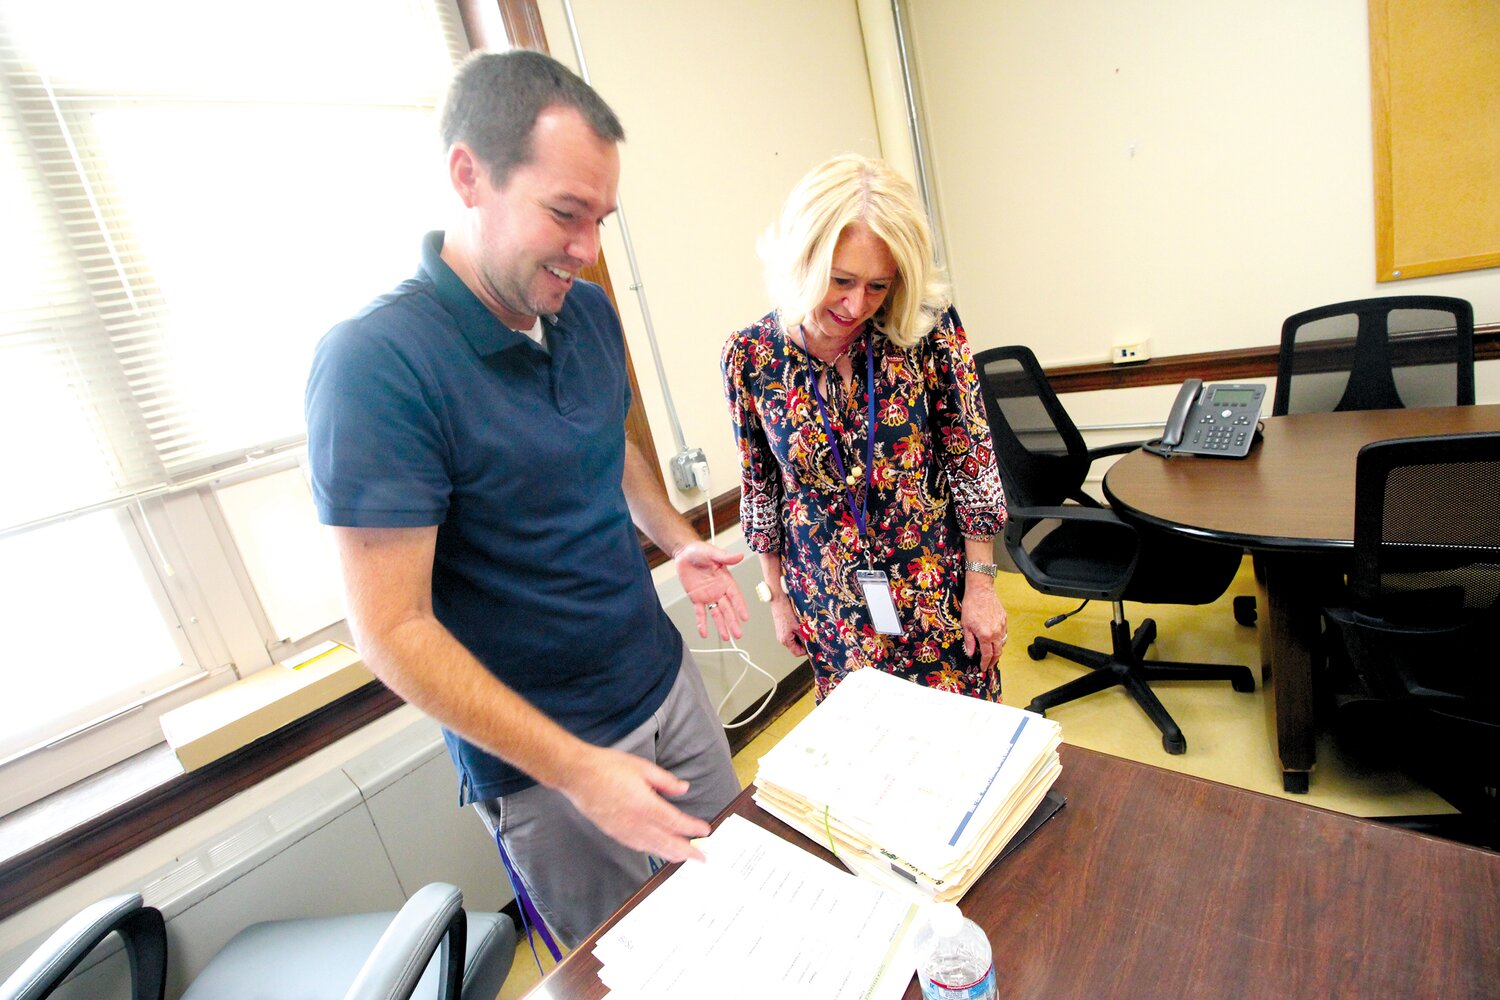 NEW TO THE JOB, NEW TO THE SCHOOL:  Newly named Oakland Beach Principal Matthew Yates goes over classroom material with Superintendent Lynn Dambruch.